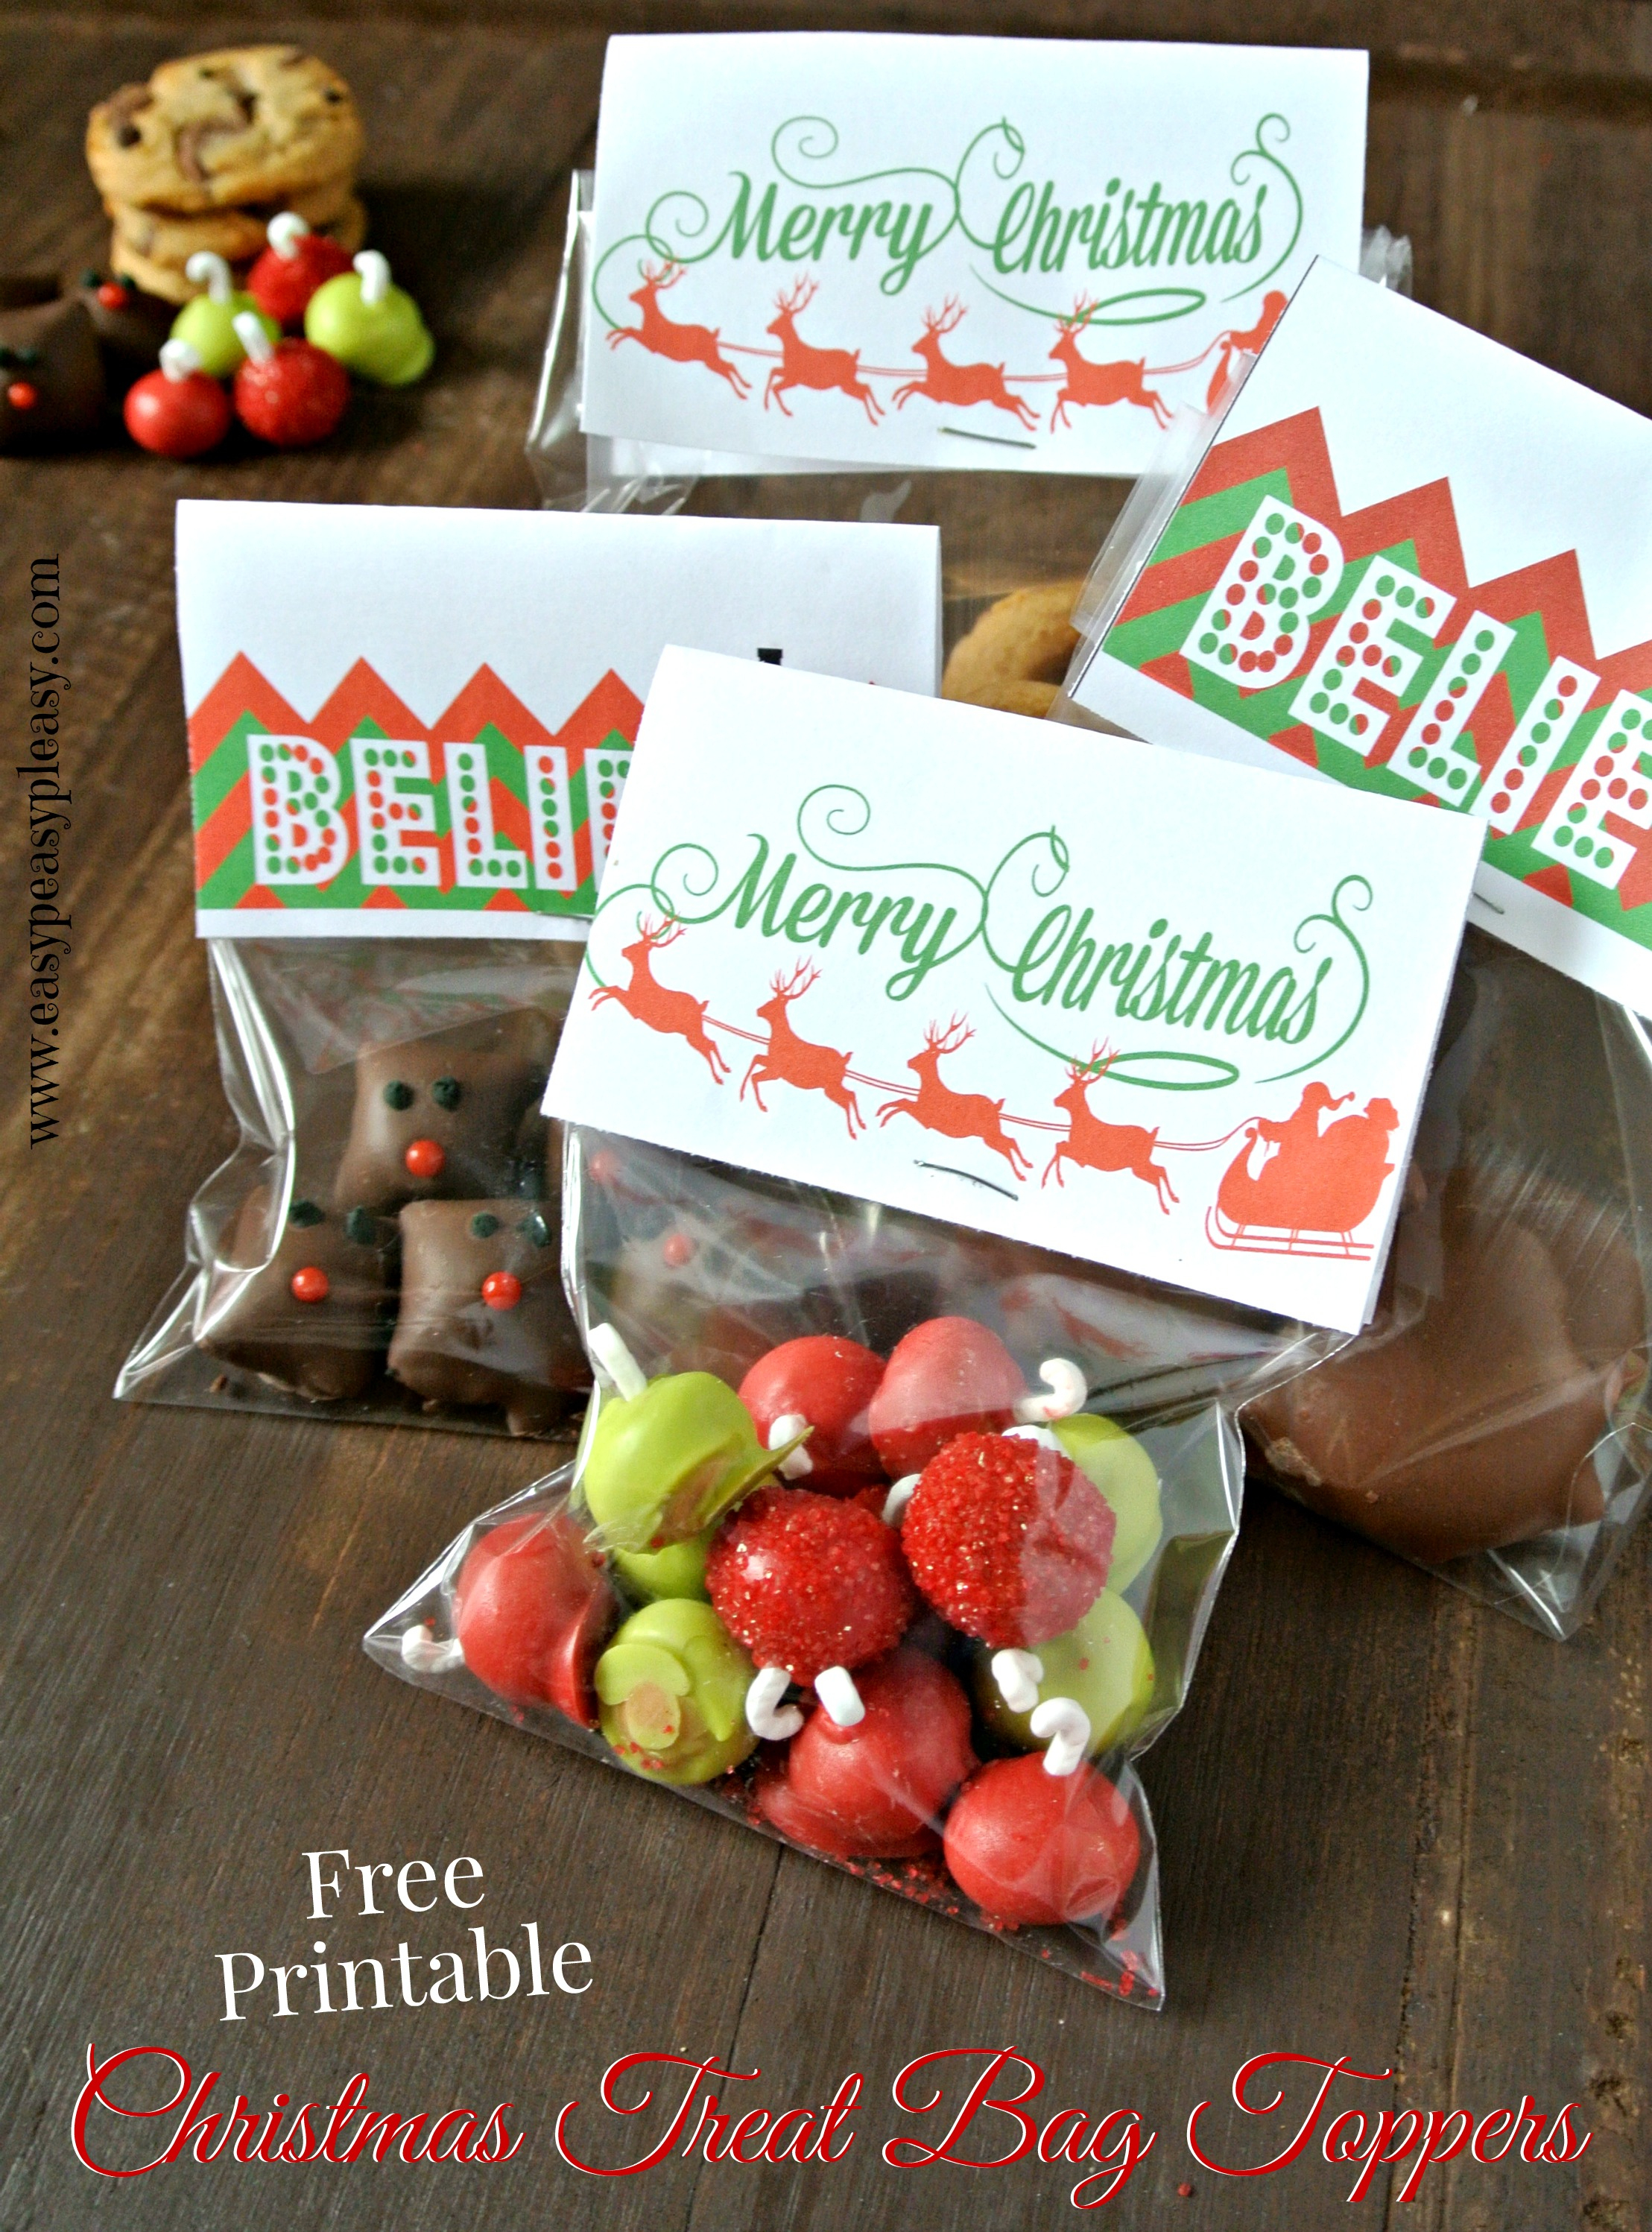 3 Free Printable Christmas Treat Bag Toppers - Easy Peasy Pleasy - Free Printable Thanksgiving Treat Bag Toppers